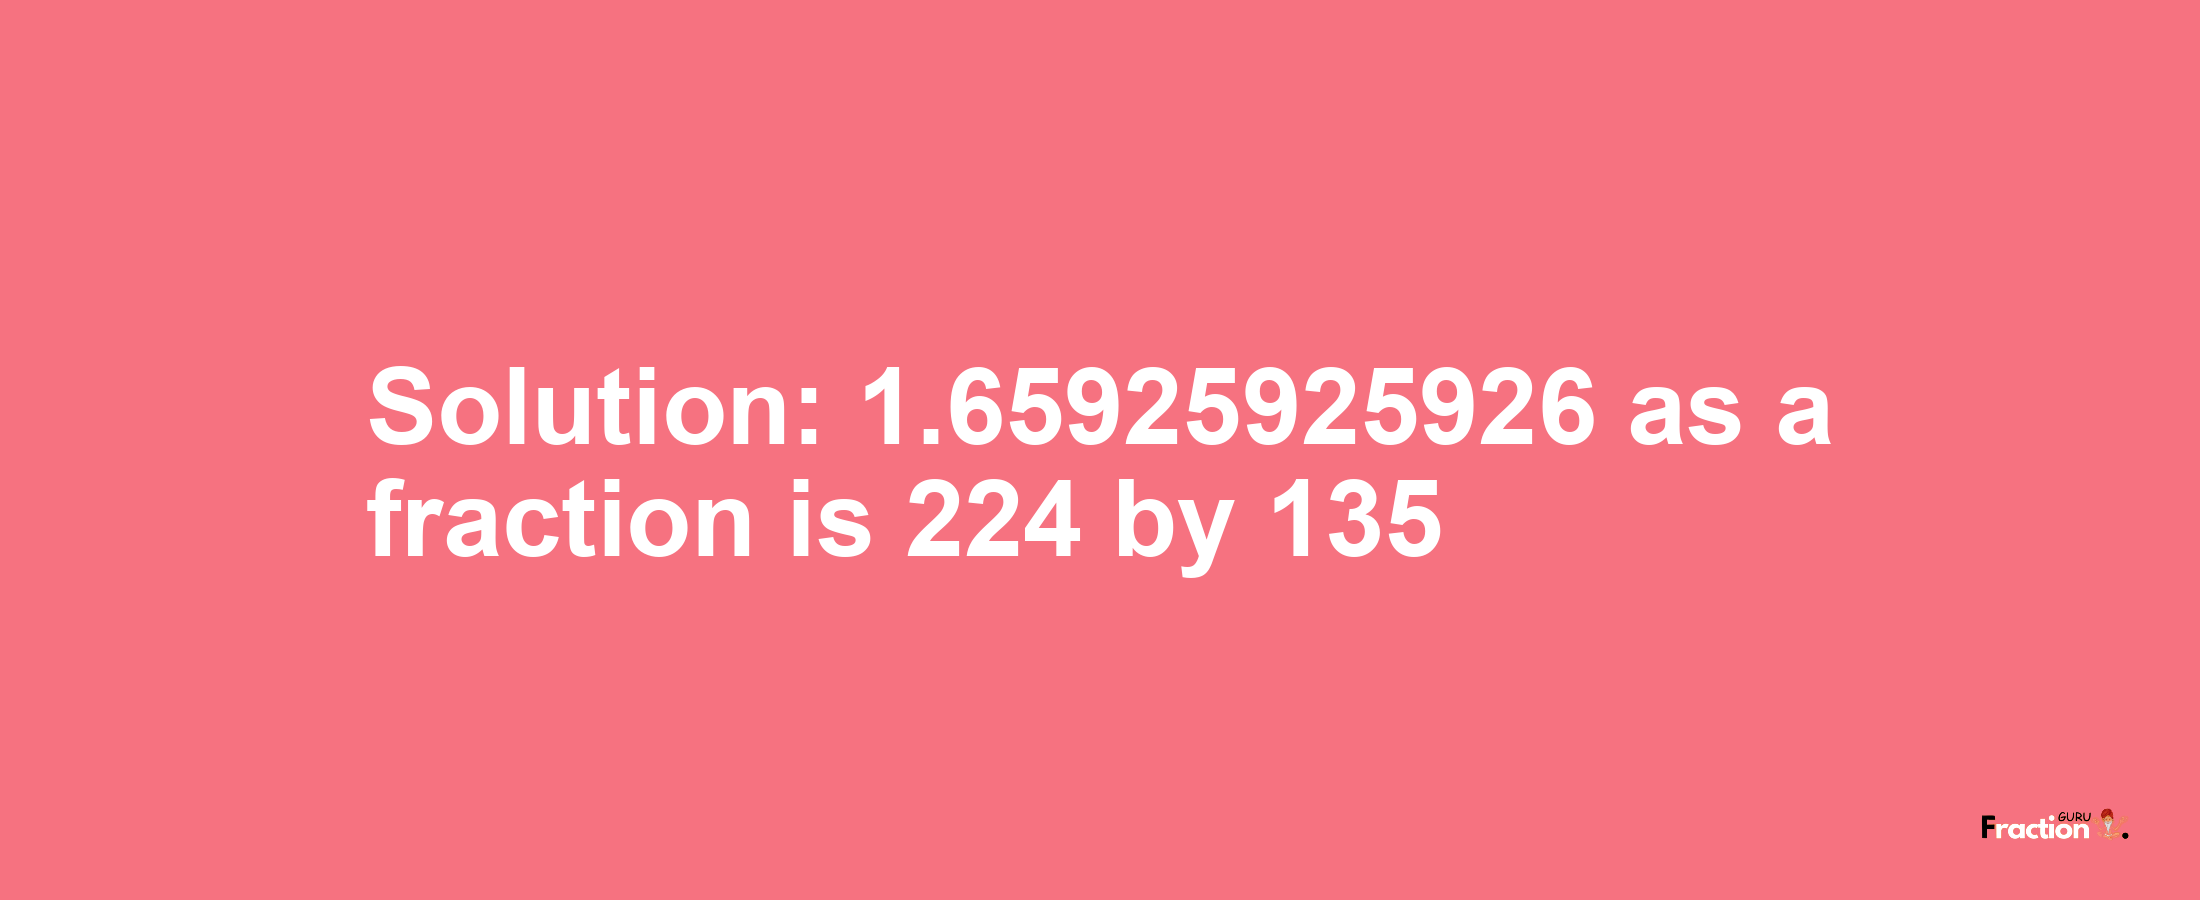 Solution:1.65925925926 as a fraction is 224/135